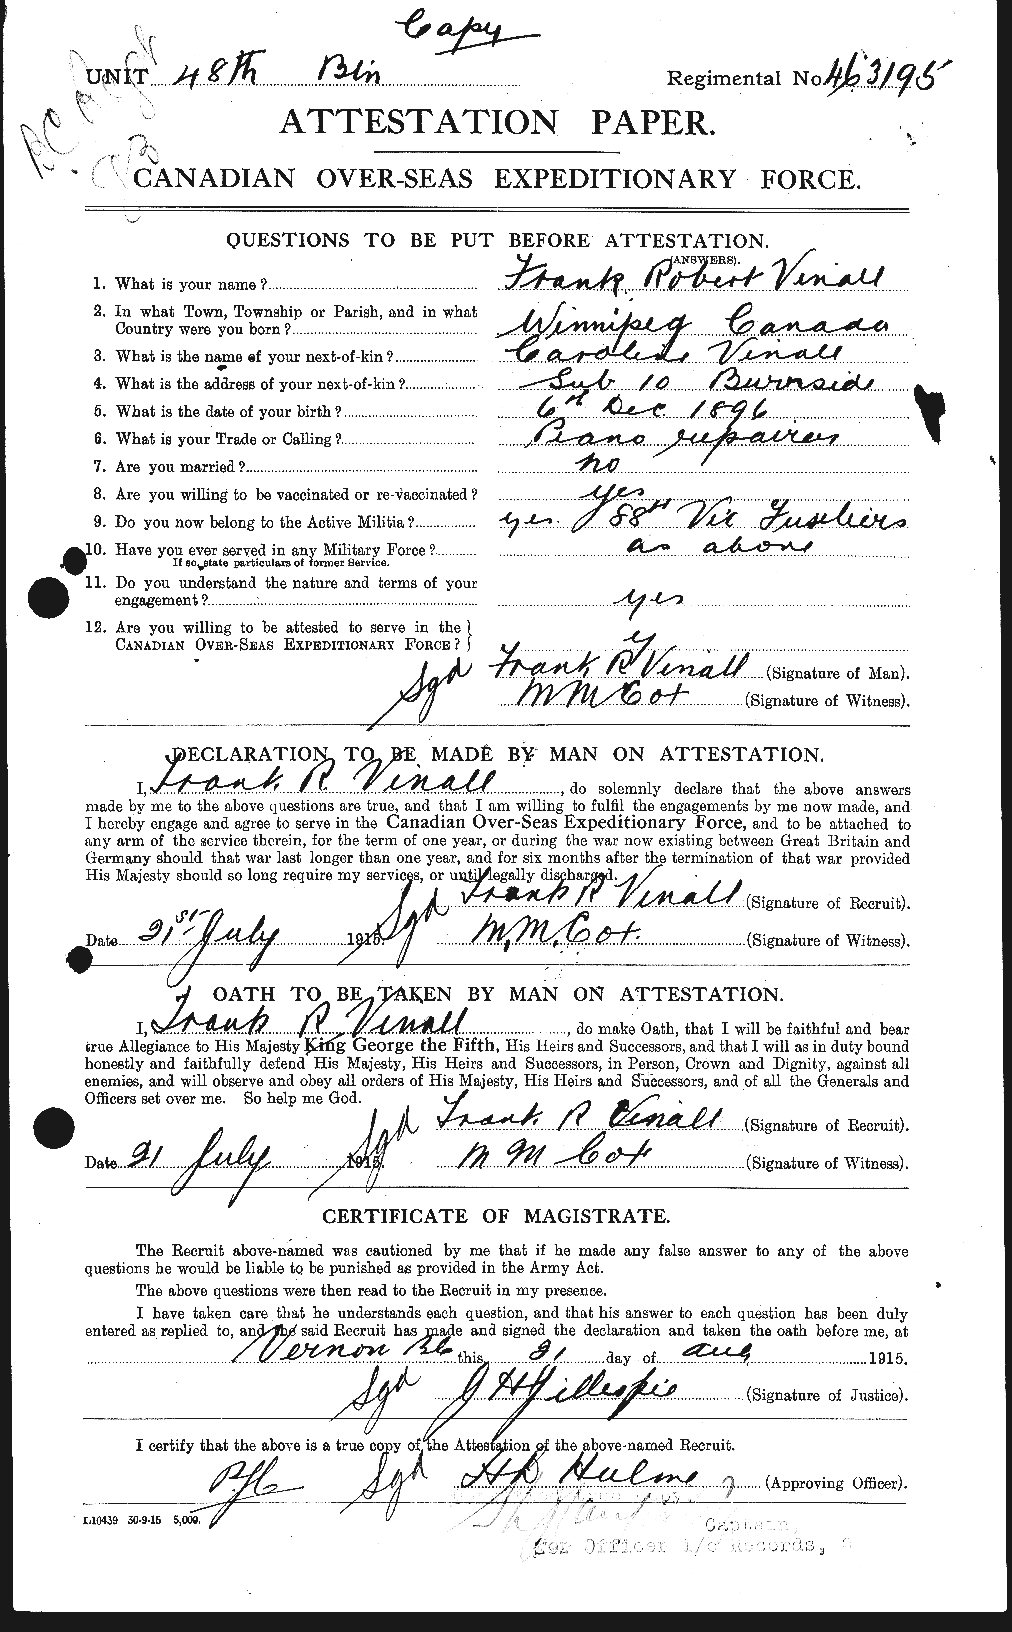 Personnel Records of the First World War - CEF 653914a